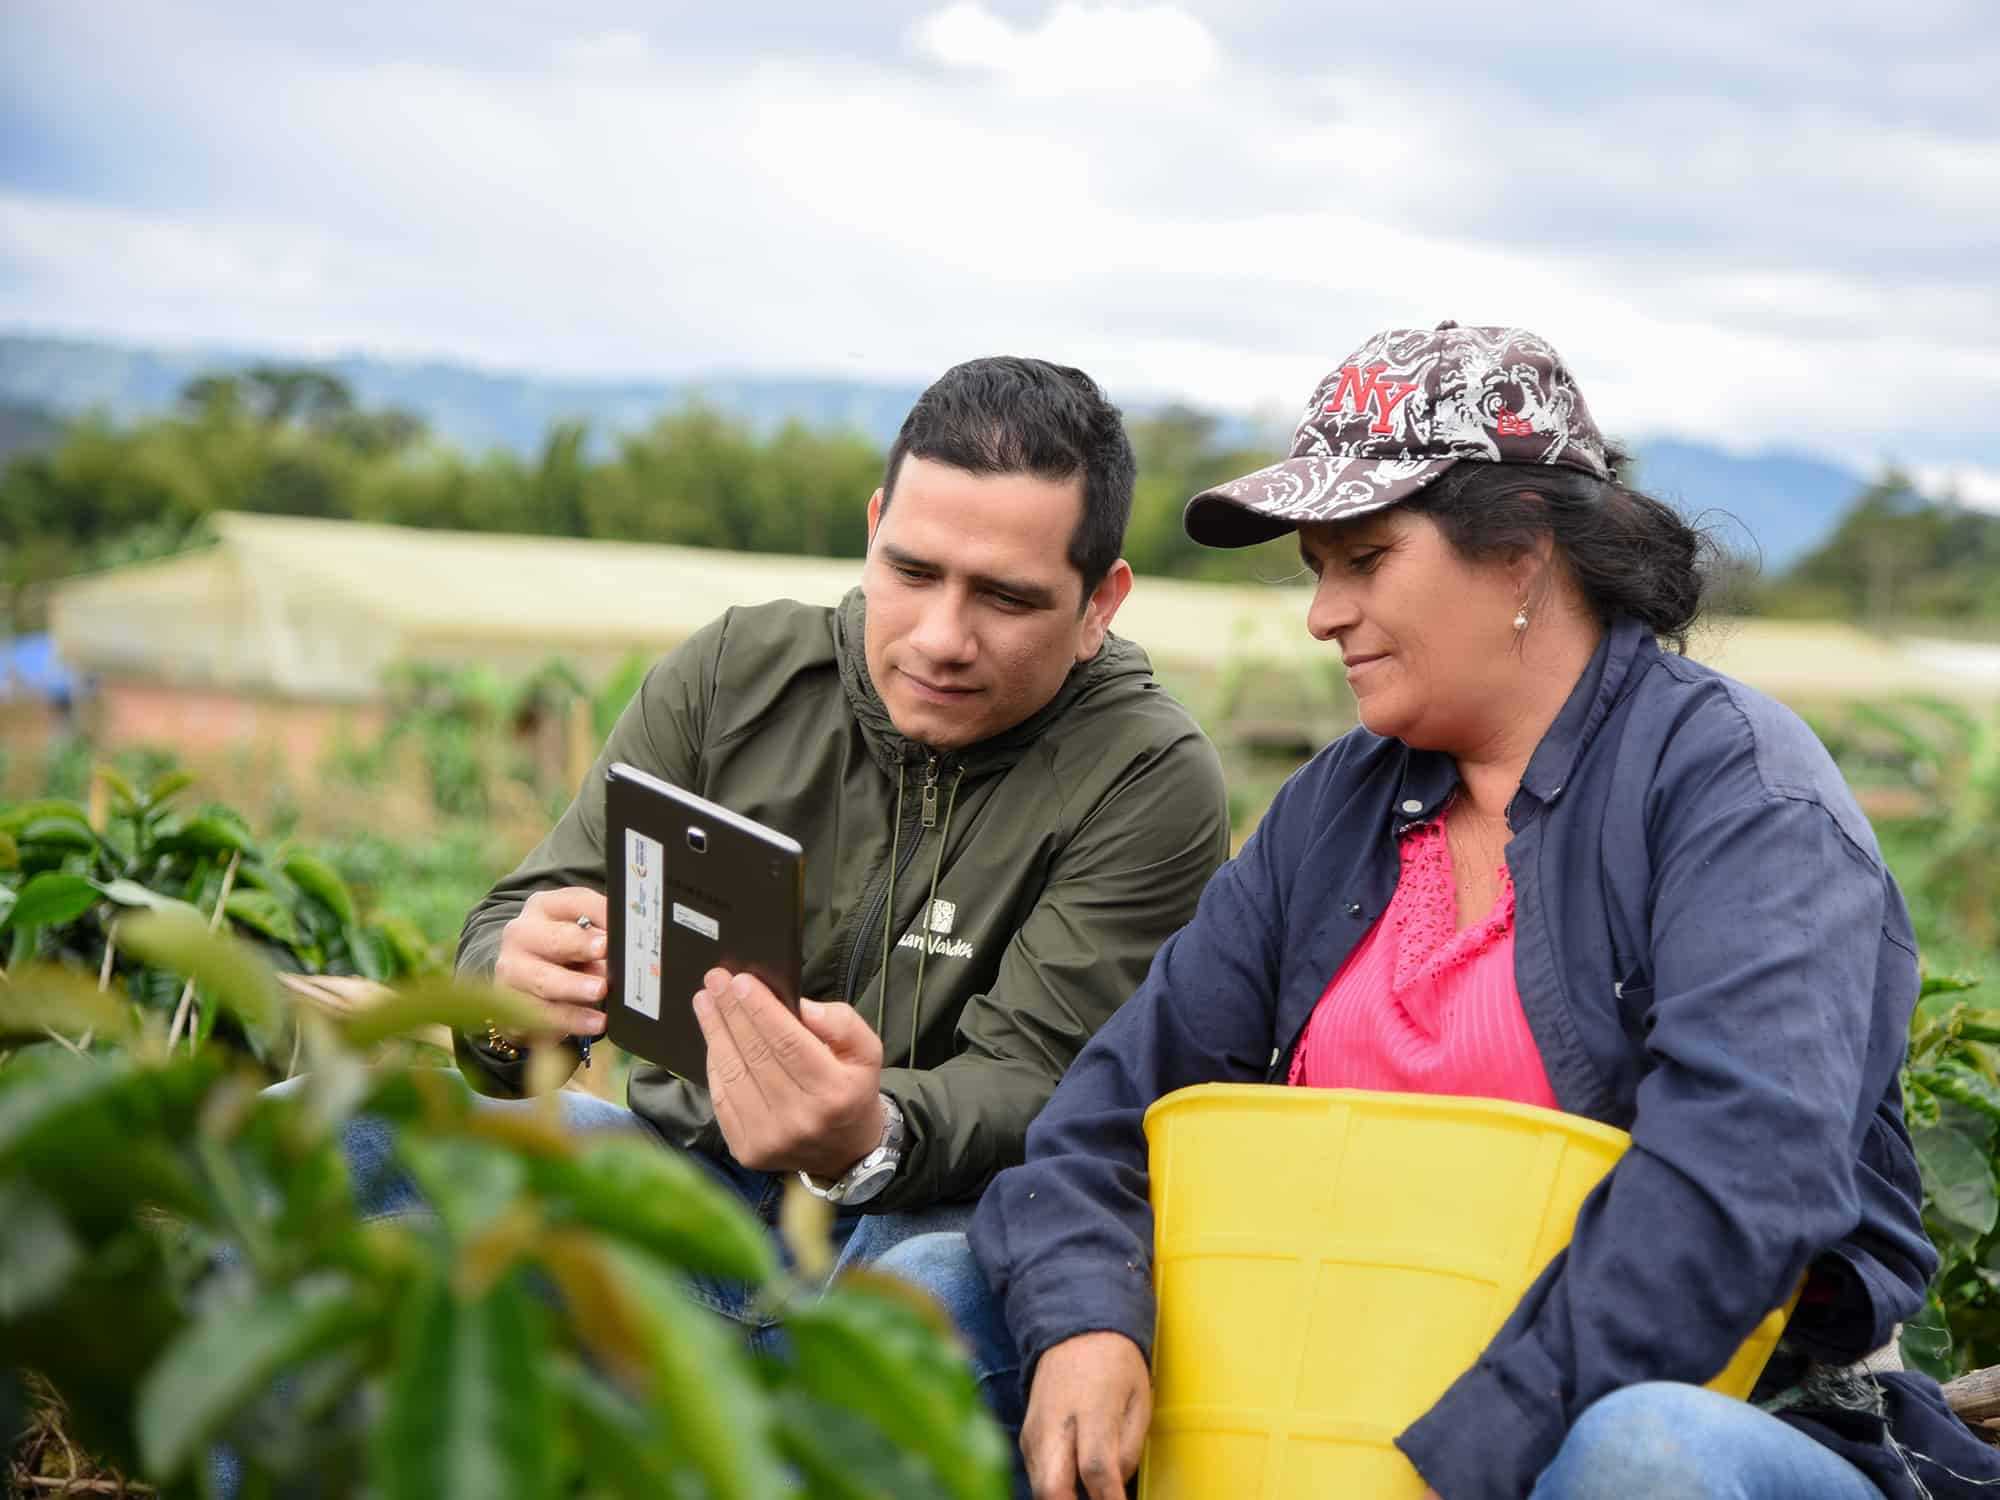 A man holding a tablet and a woman looking at the tablet, both are sitting in a green field